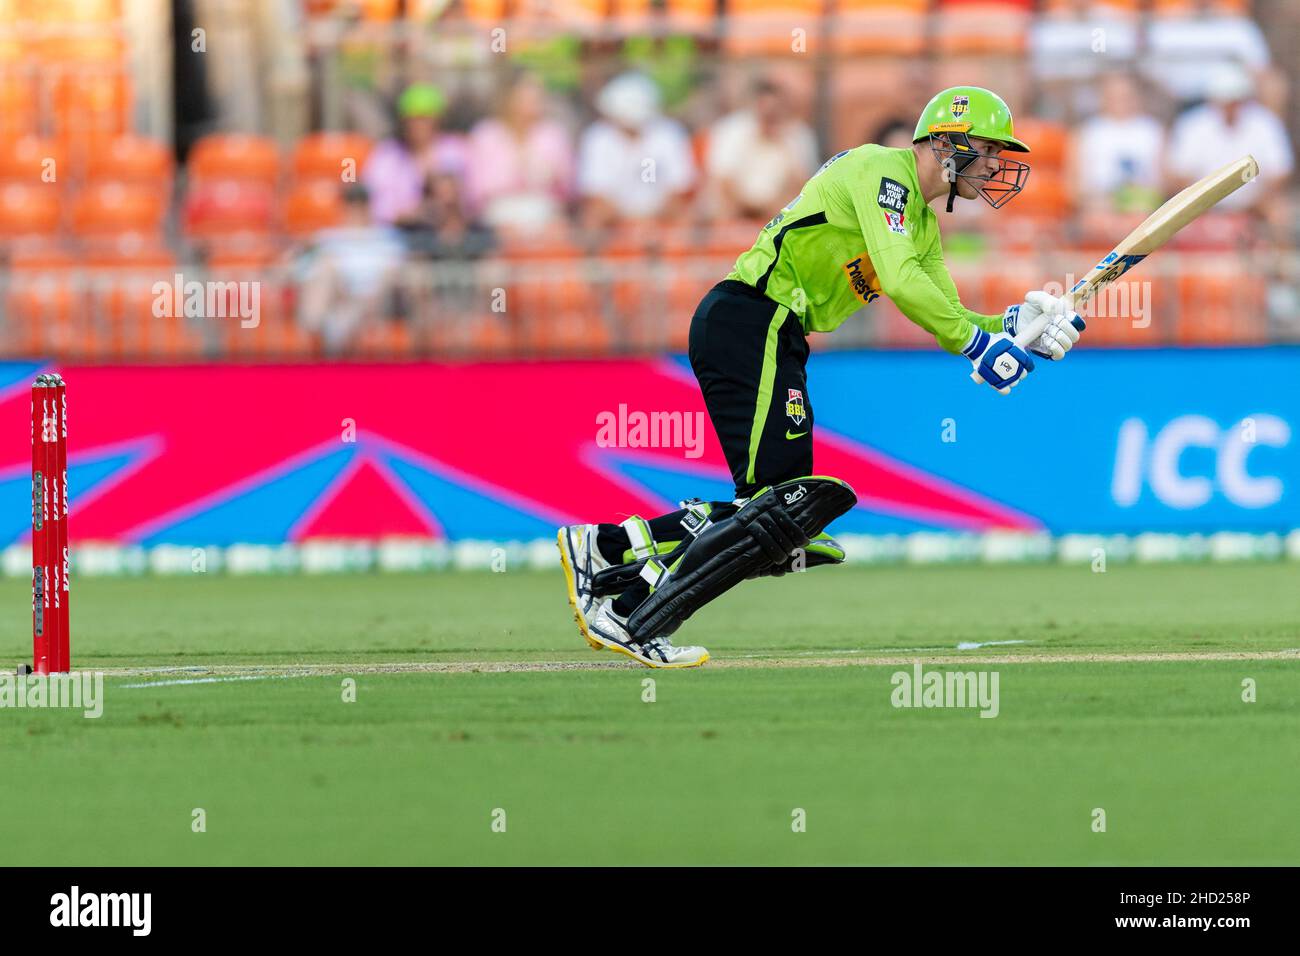 Sydney, Australia. 02nd Jan, 2022. Matthew Gilkes of Thunder bats during the match between Sydney Thunder and Adelaide Strikers at Sydney Showground Stadium, on January 02, 2022, in Sydney, Australia. (Editorial use only) Credit: Izhar Ahmed Khan/Alamy Live News/Alamy Live News Stock Photo